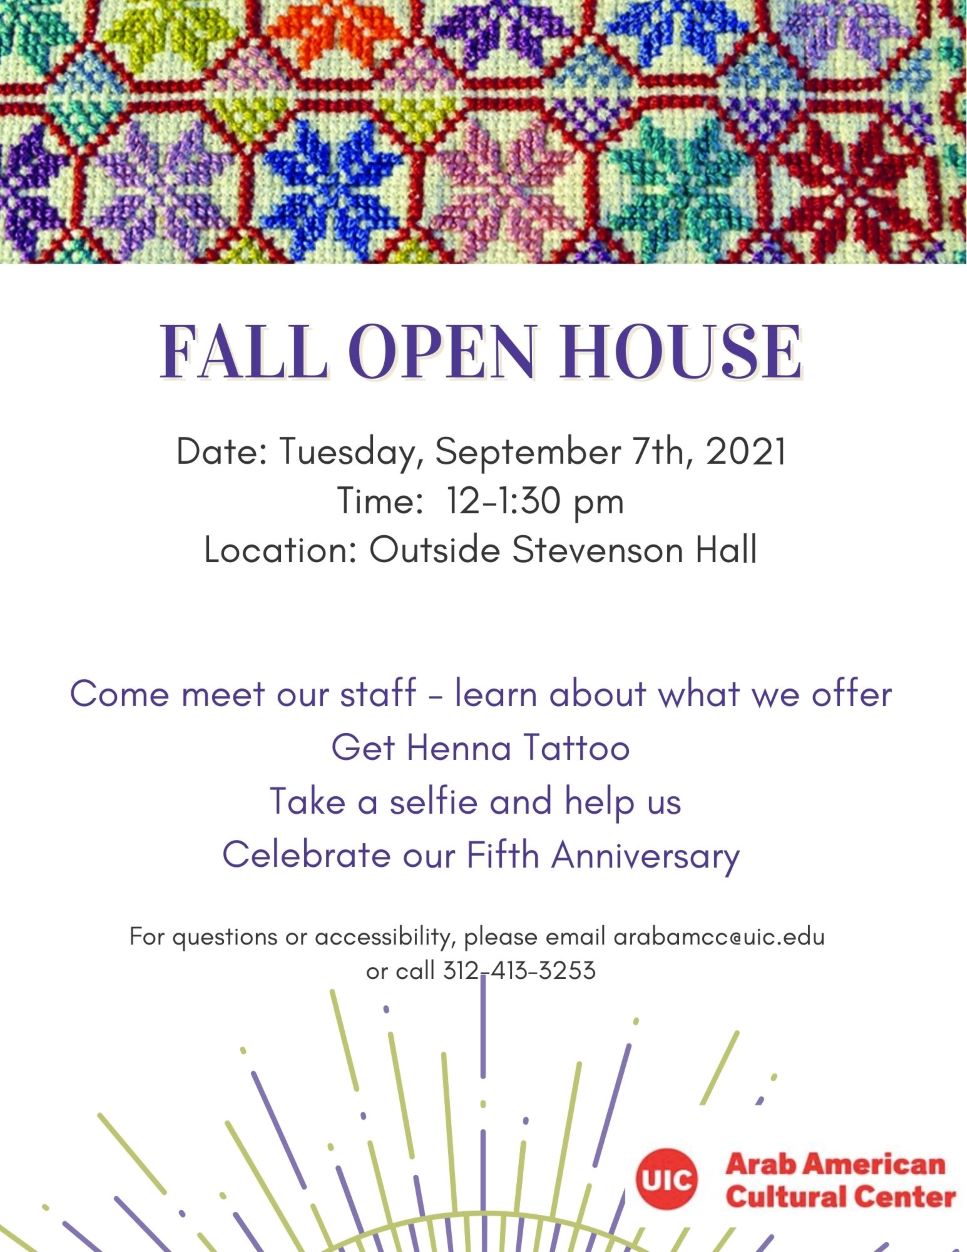 top band is colorful embroidery in geometric flower patterns followed by information about the Open house and bottom band has small part of a sun with rays in purple and gold colors with the Logo of the center in red to the right